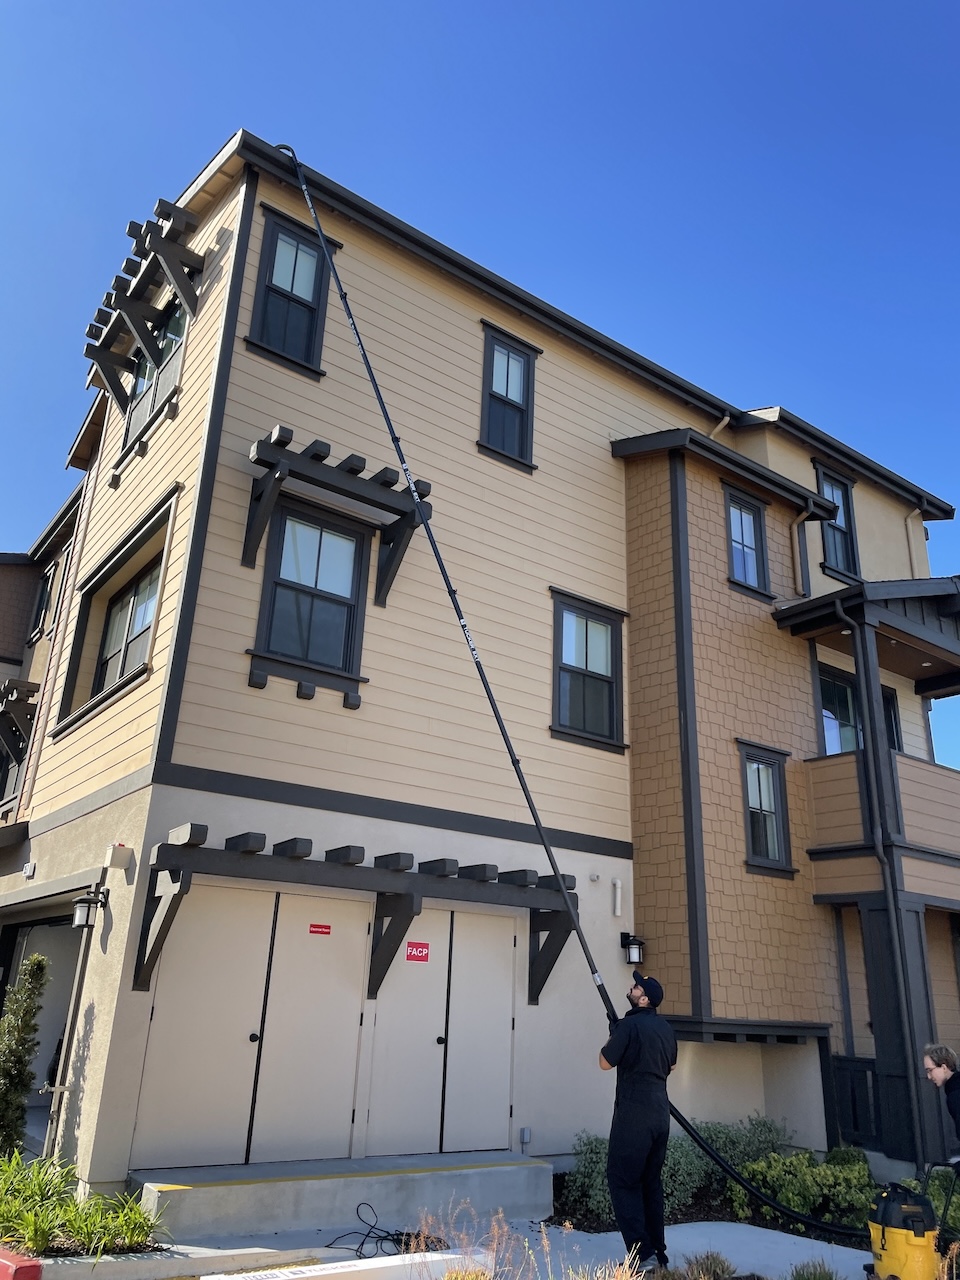 Gutter cleaning with vacuum poles.